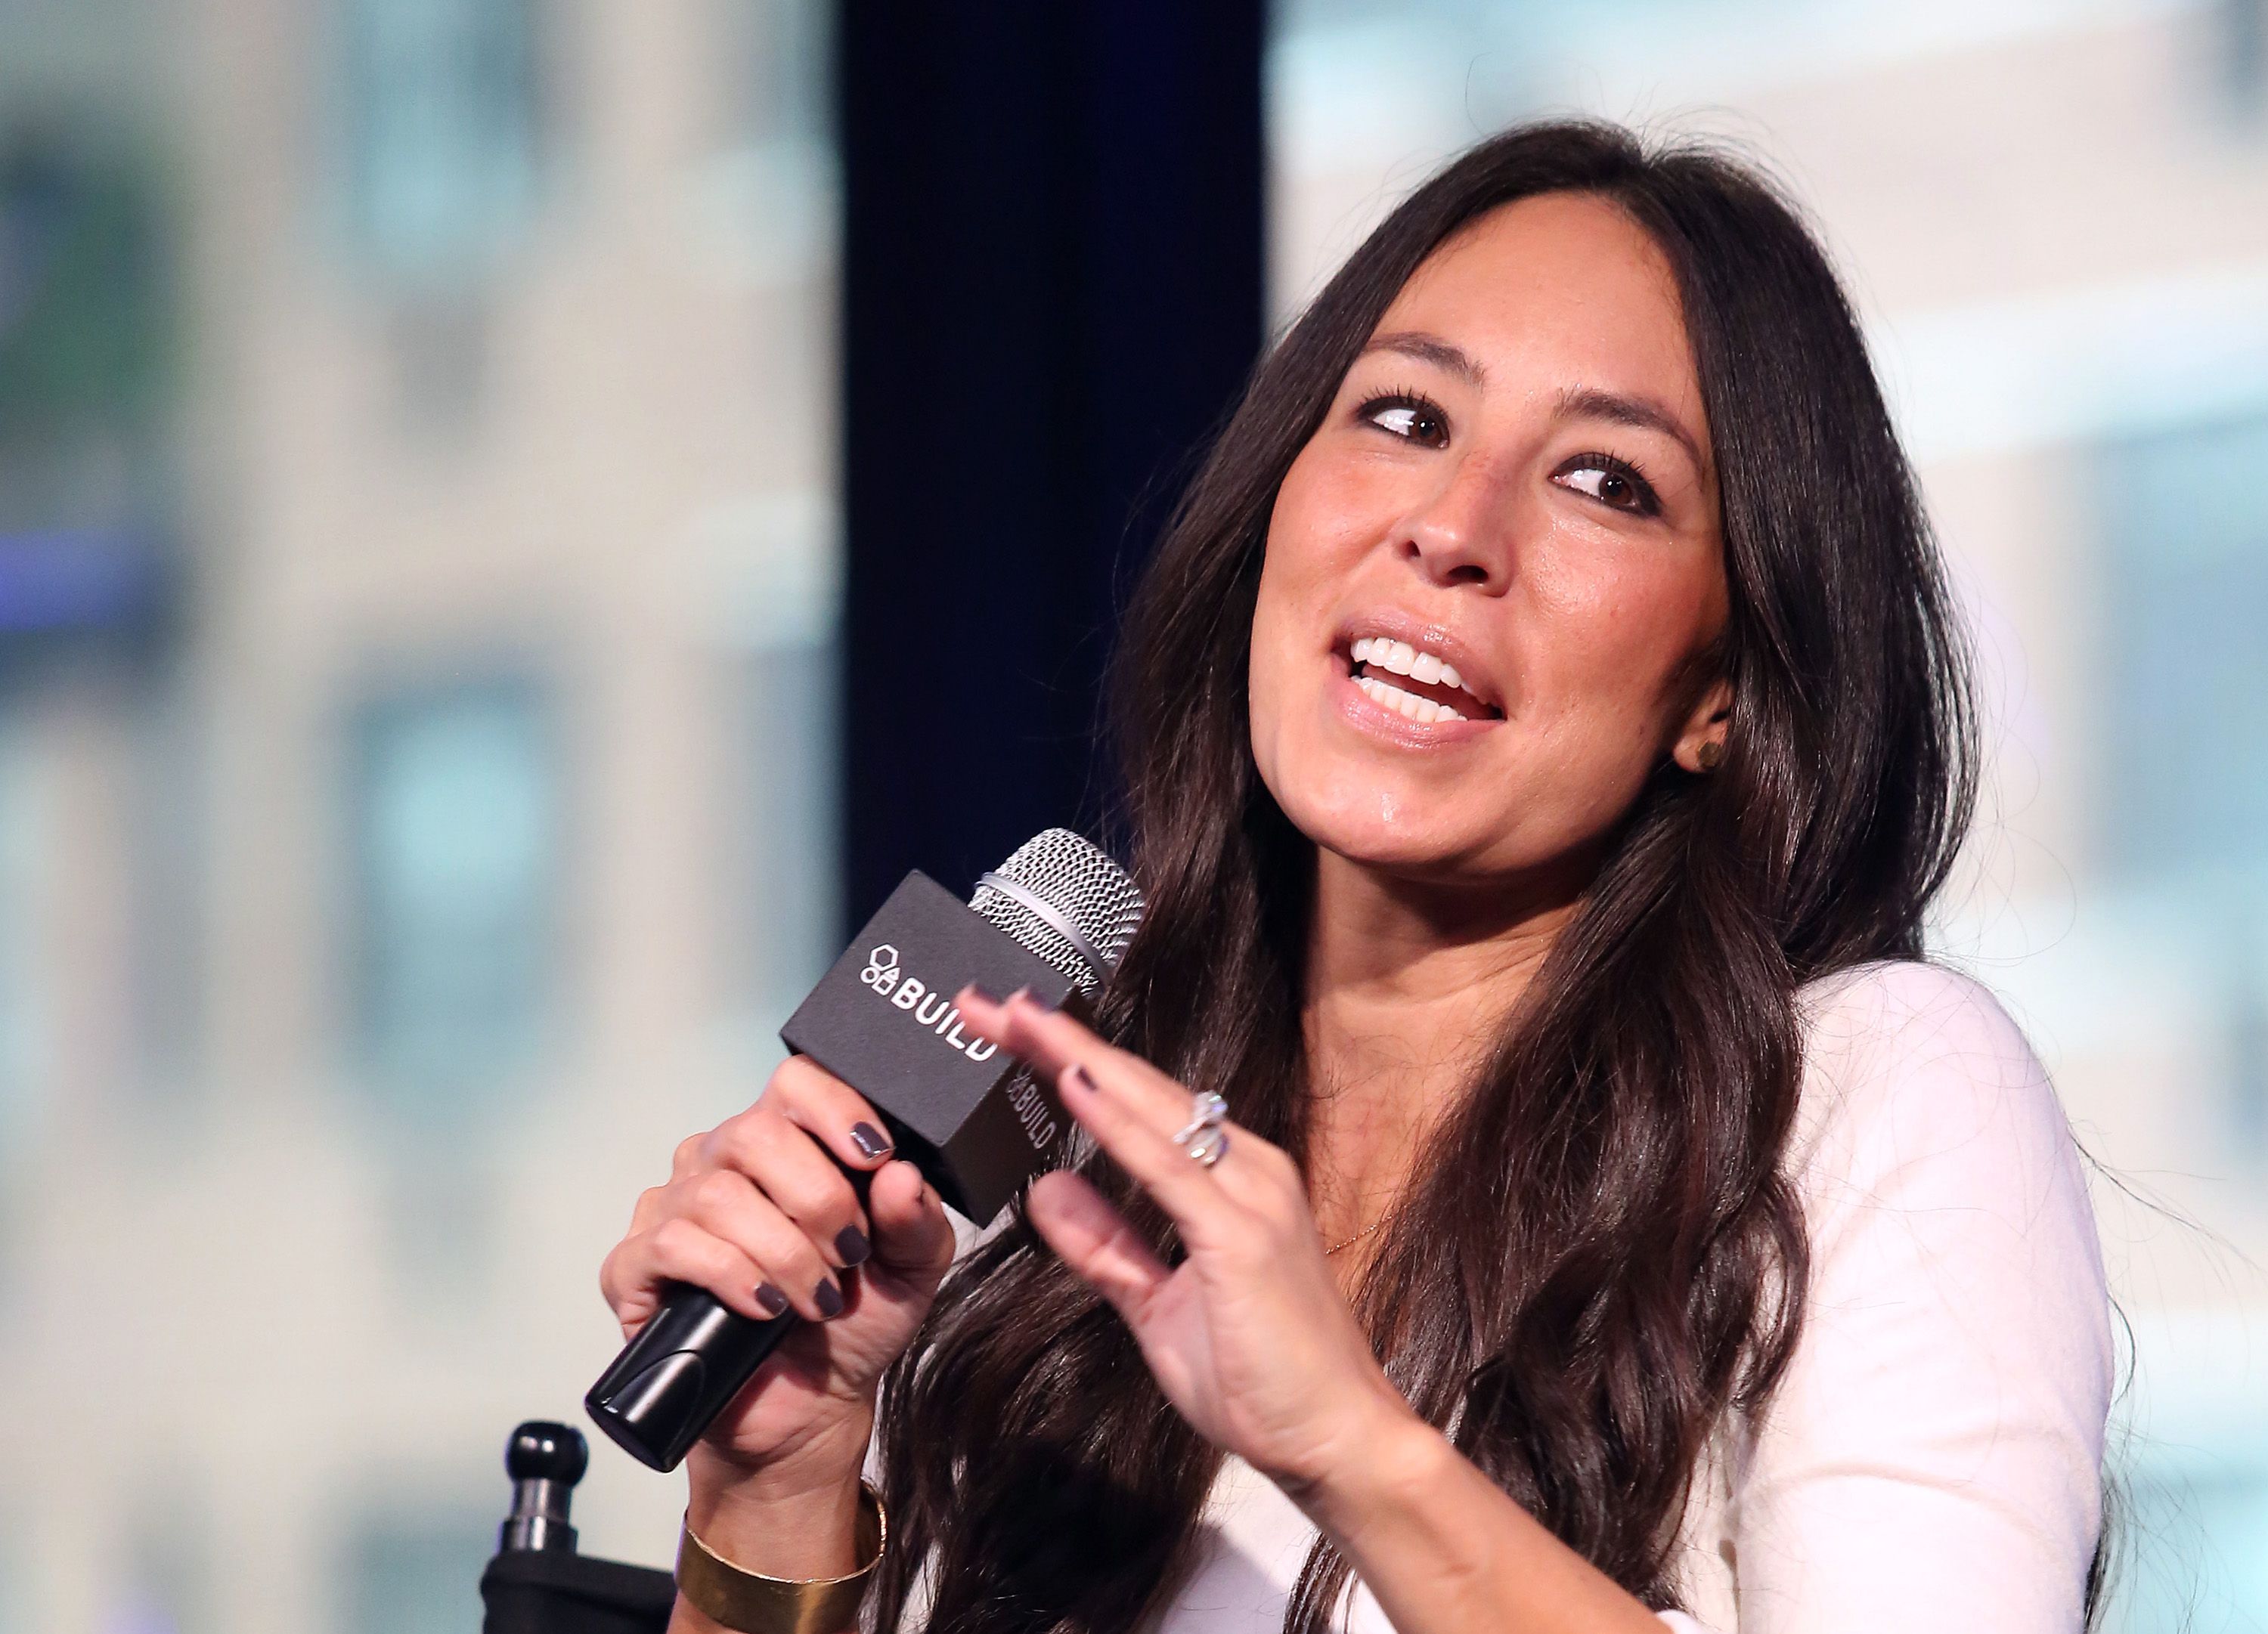 Joanna Gaines promotes "The Magnolia Story" during the AOL BUILD Series at AOL HQ on October 19, 2016, in New York City | Photo: Donna Ward/Getty Images